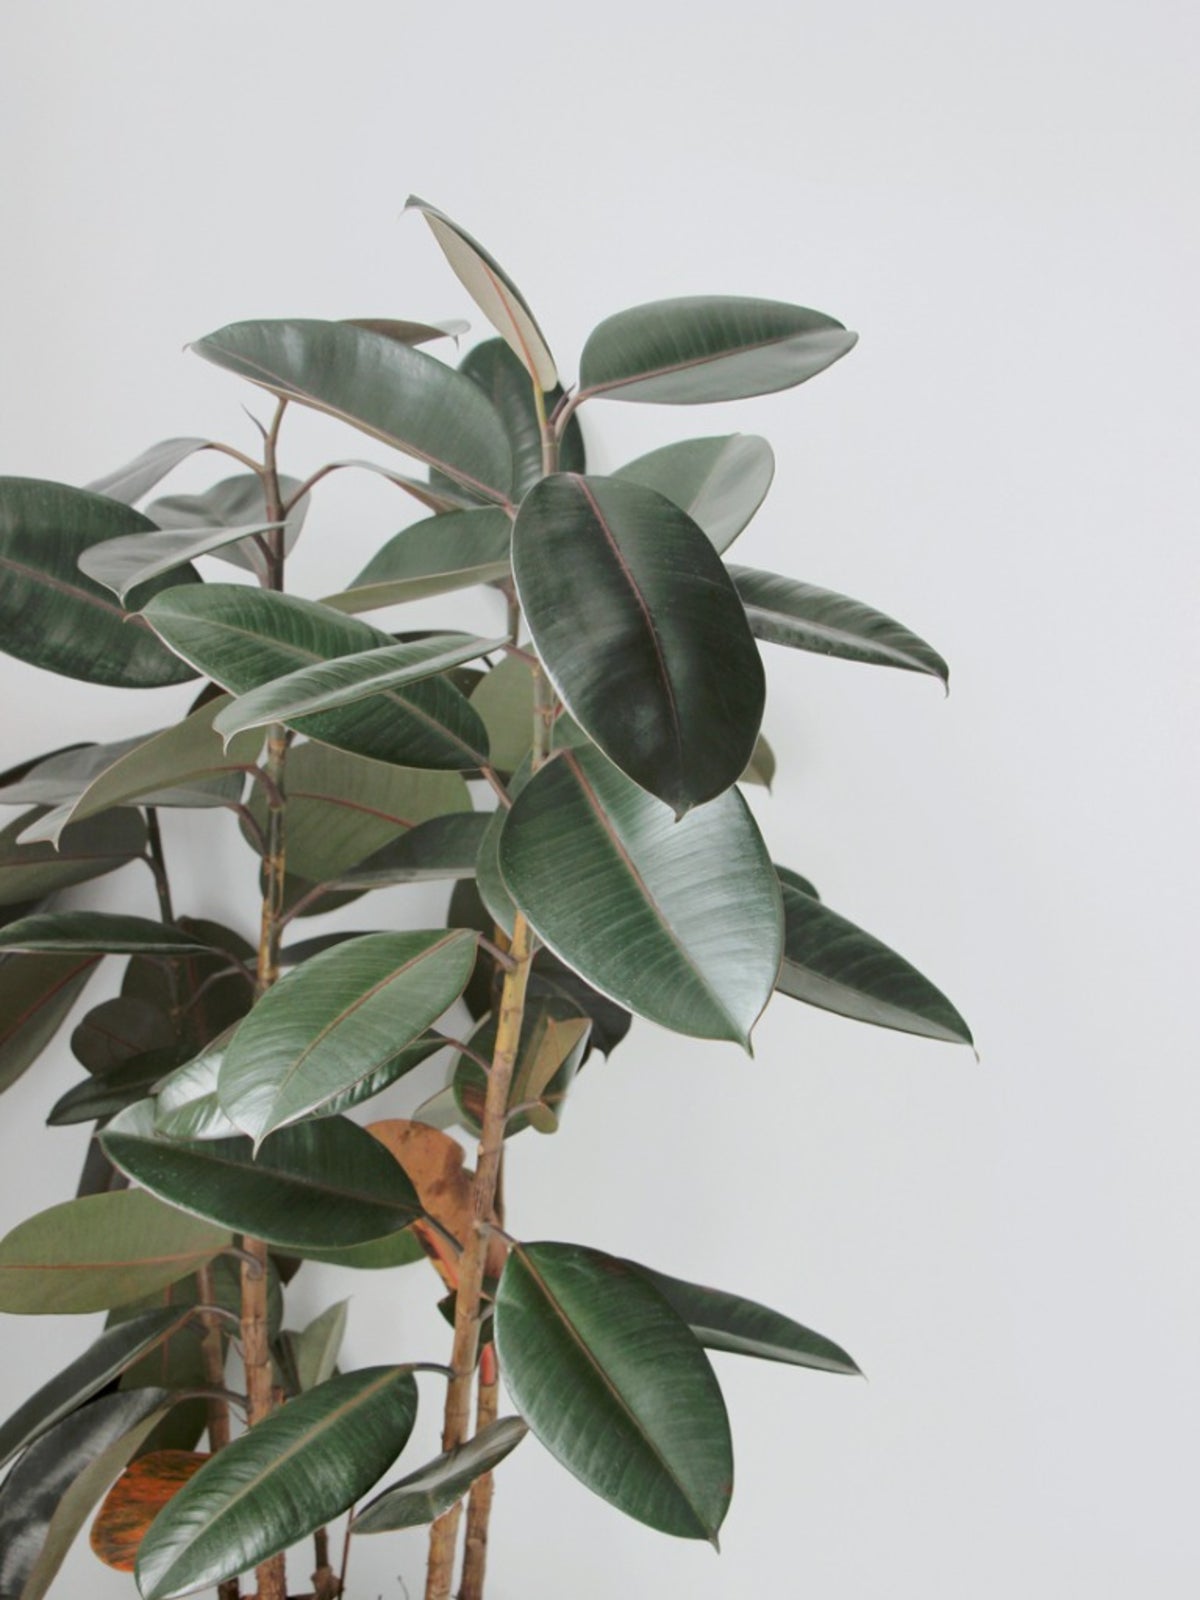 Pruning A Rubber Tree Plant How To Trim A Rubber Tree Plant